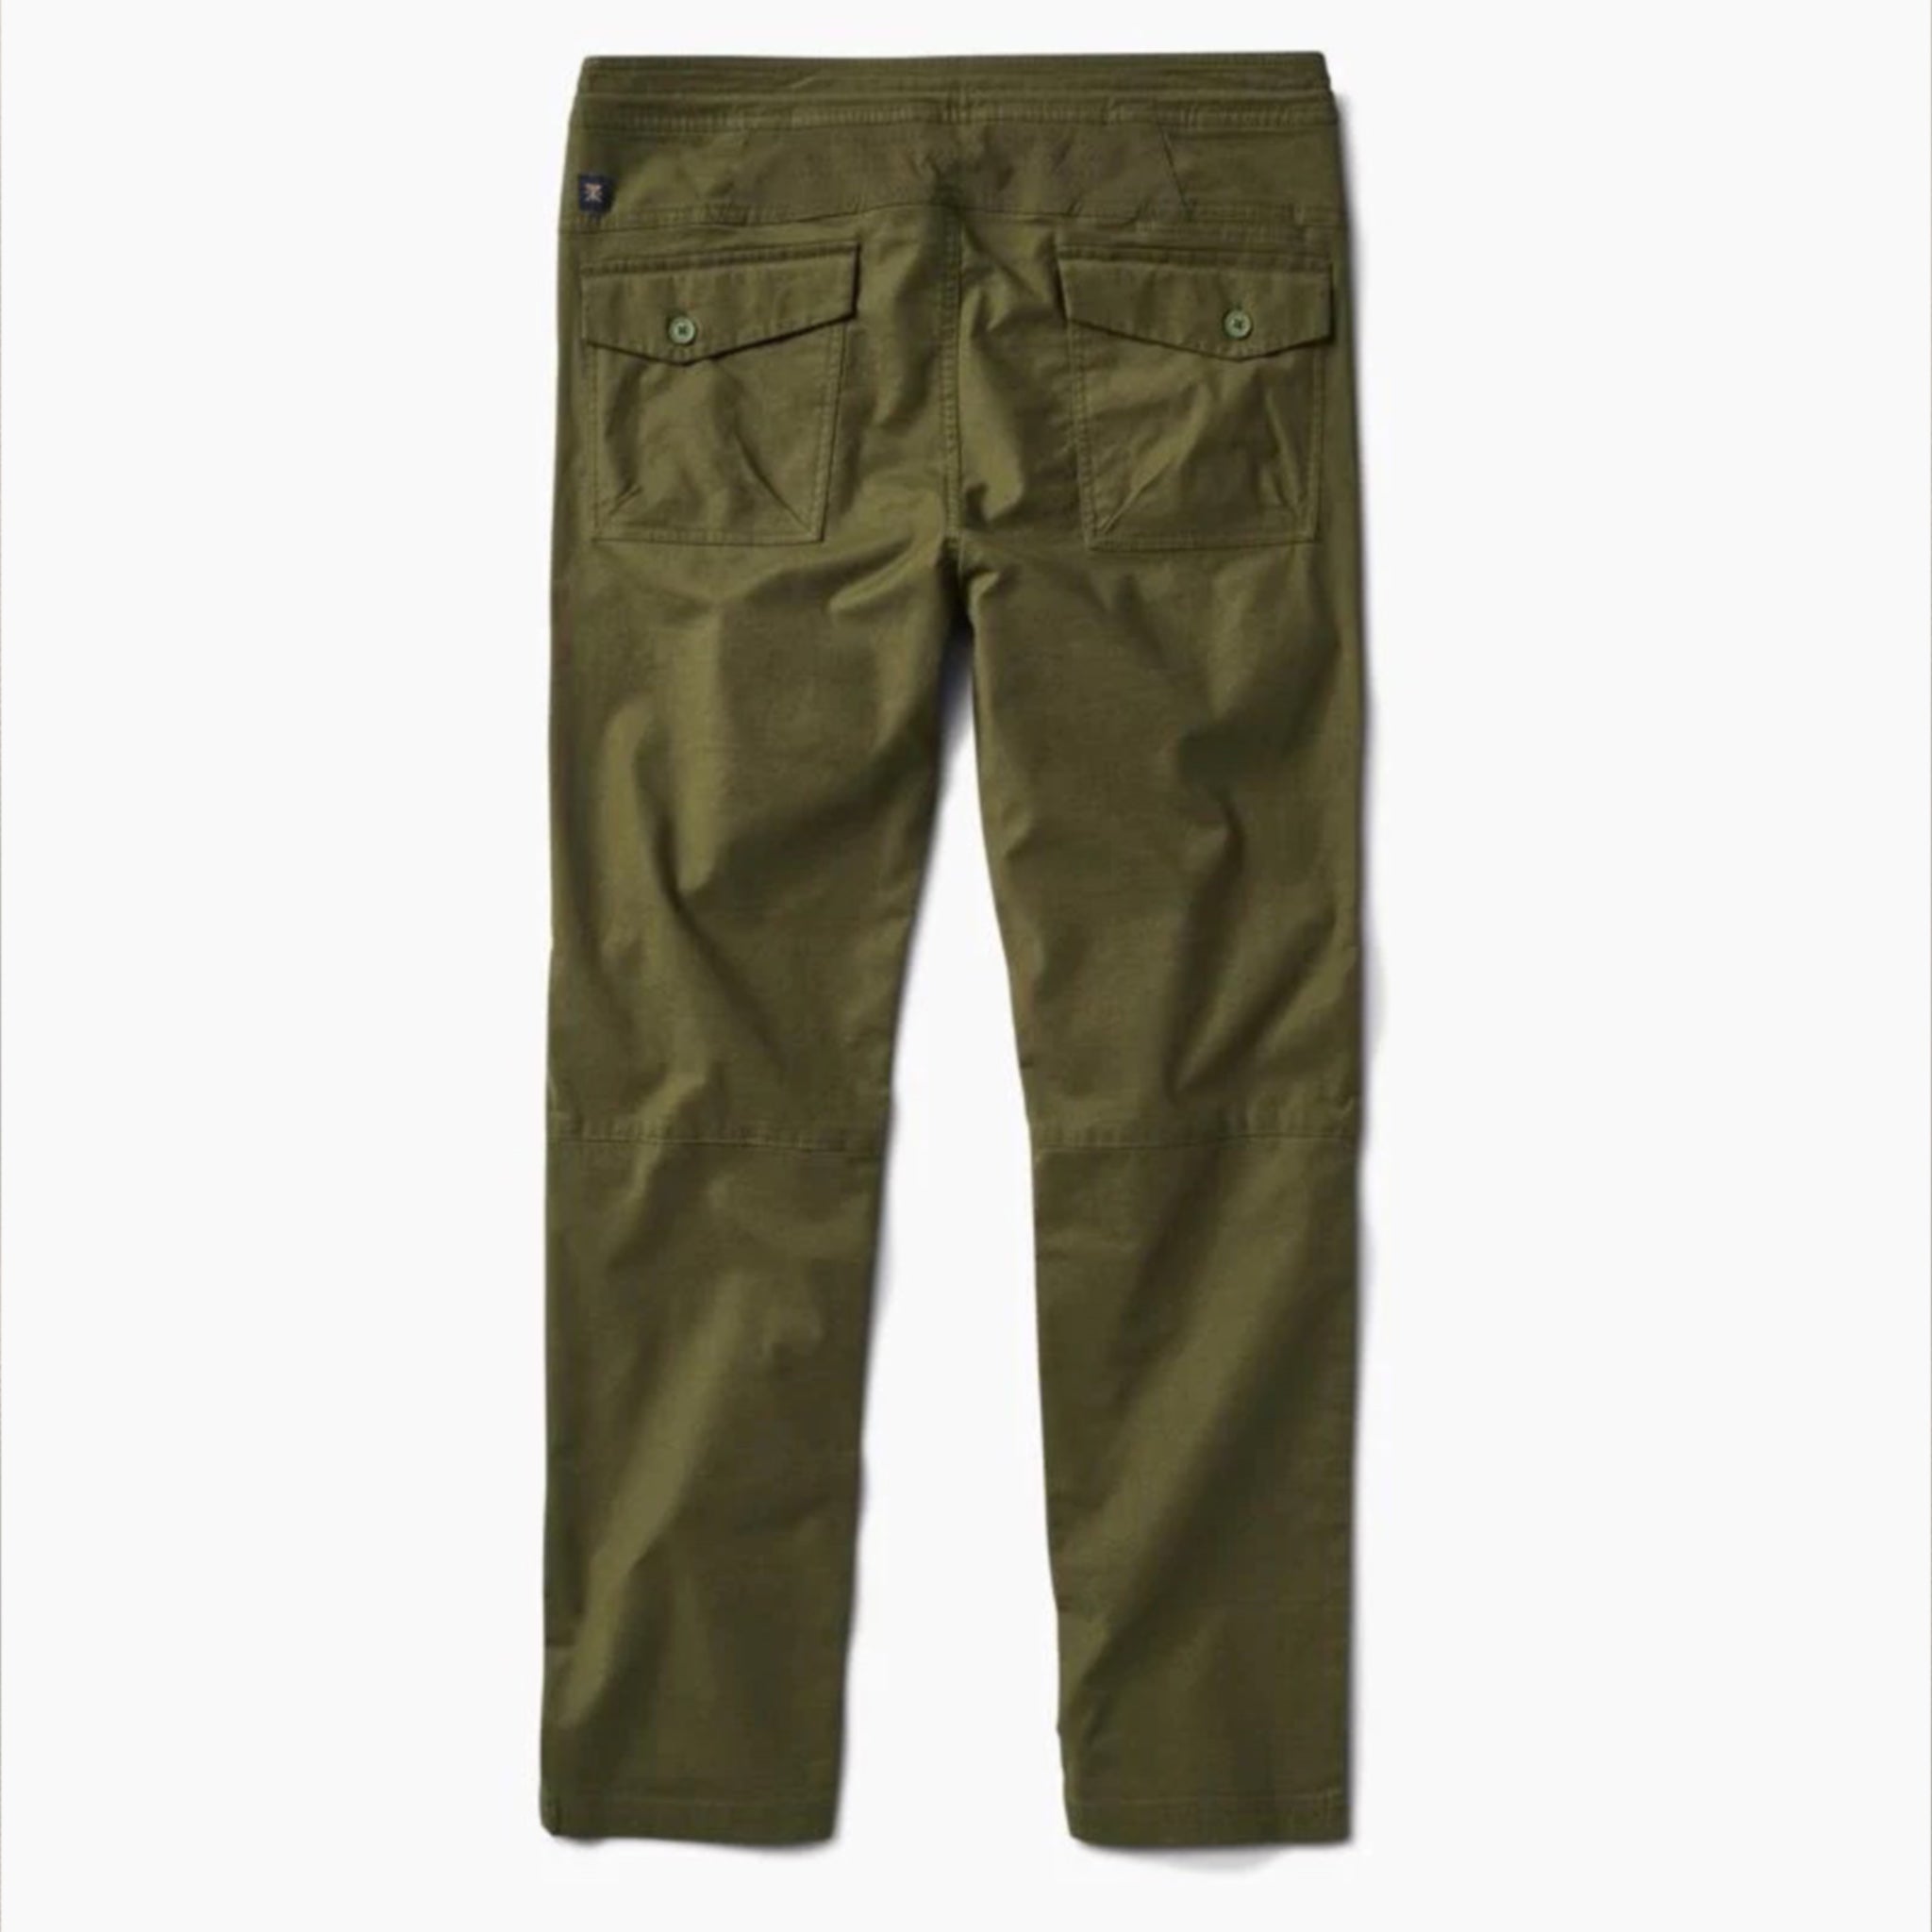 Roark Layover 2.0 Stretch Travel Pant - Military